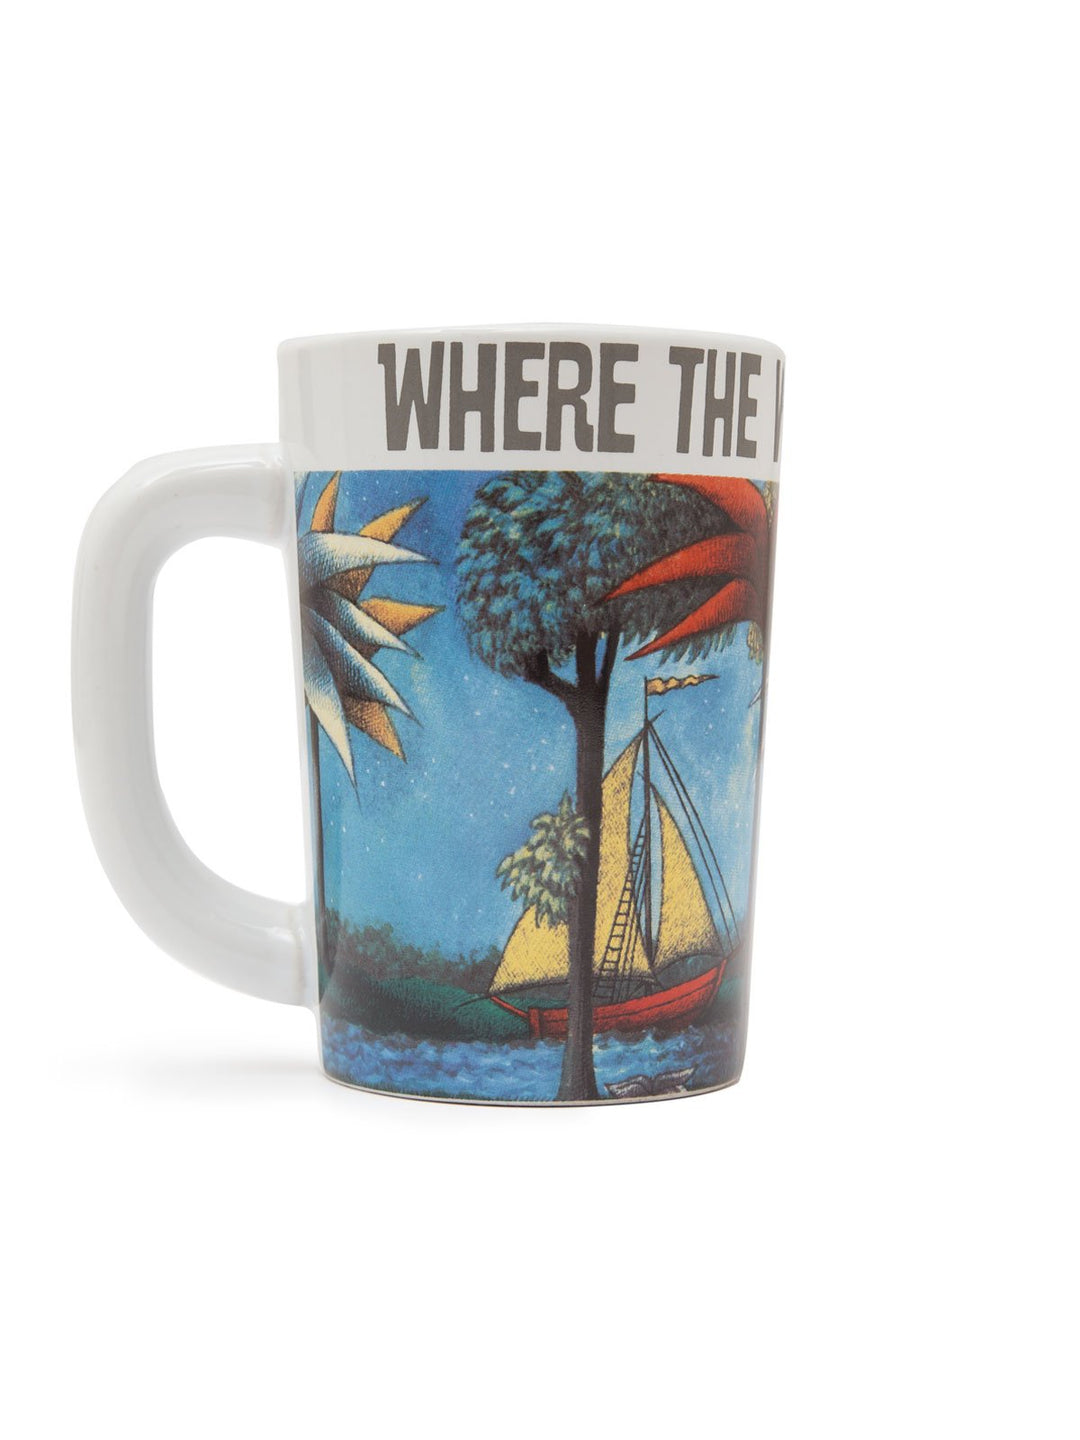 Where The Wild Things Are Mug - West of Camden - Main Image Number 1 of 2